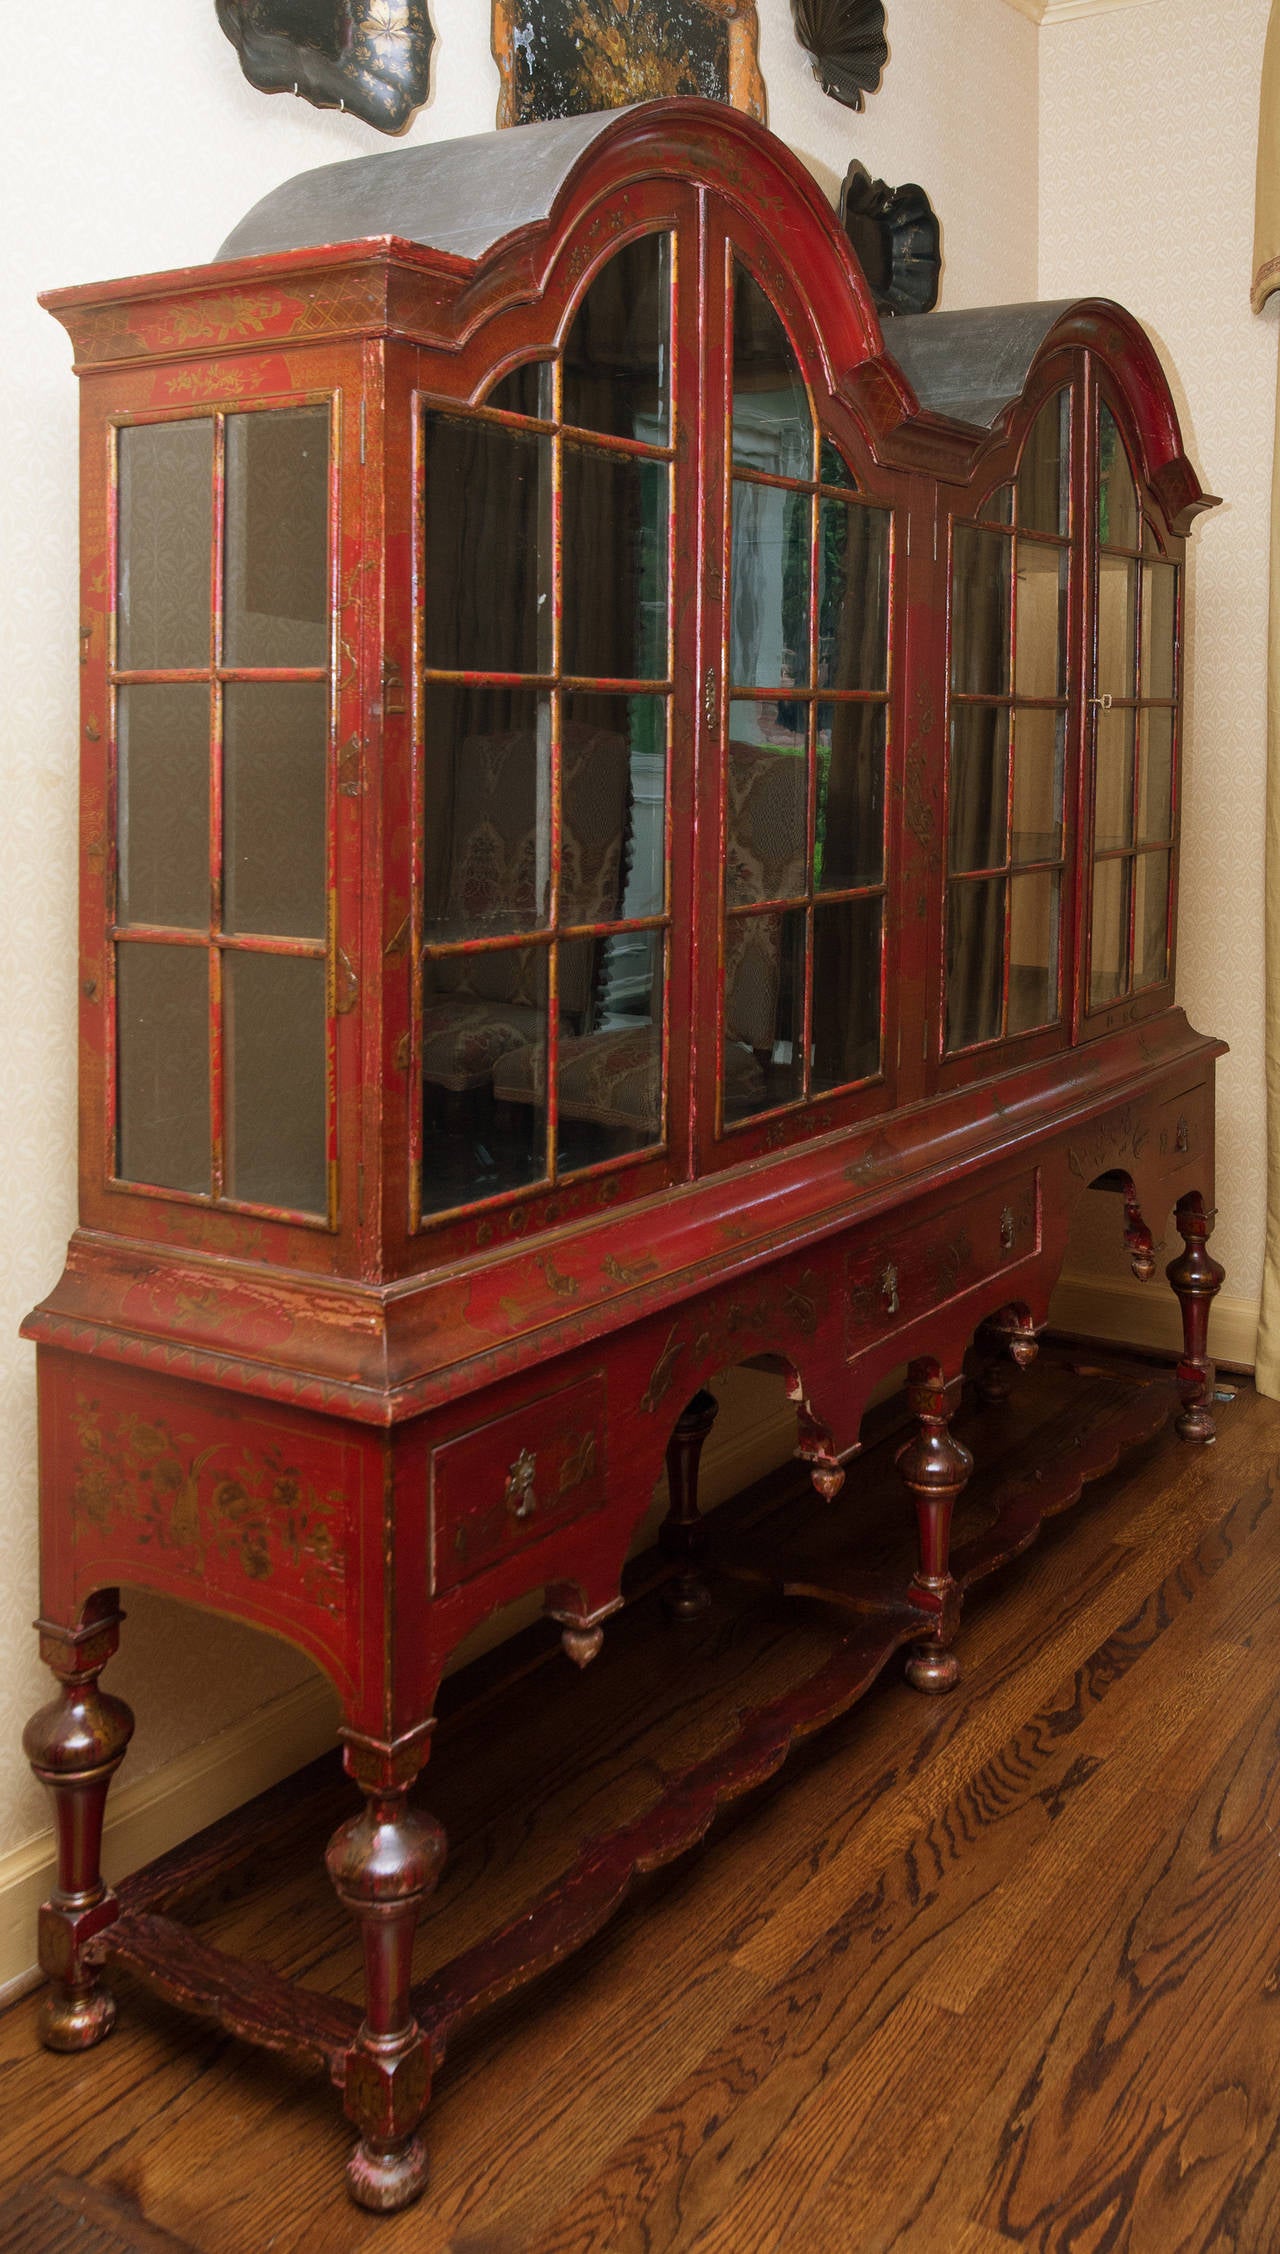 Red Lacquer and Chinoiserie Double Bonnet Cabinet with four doors and stretchers on the bottom